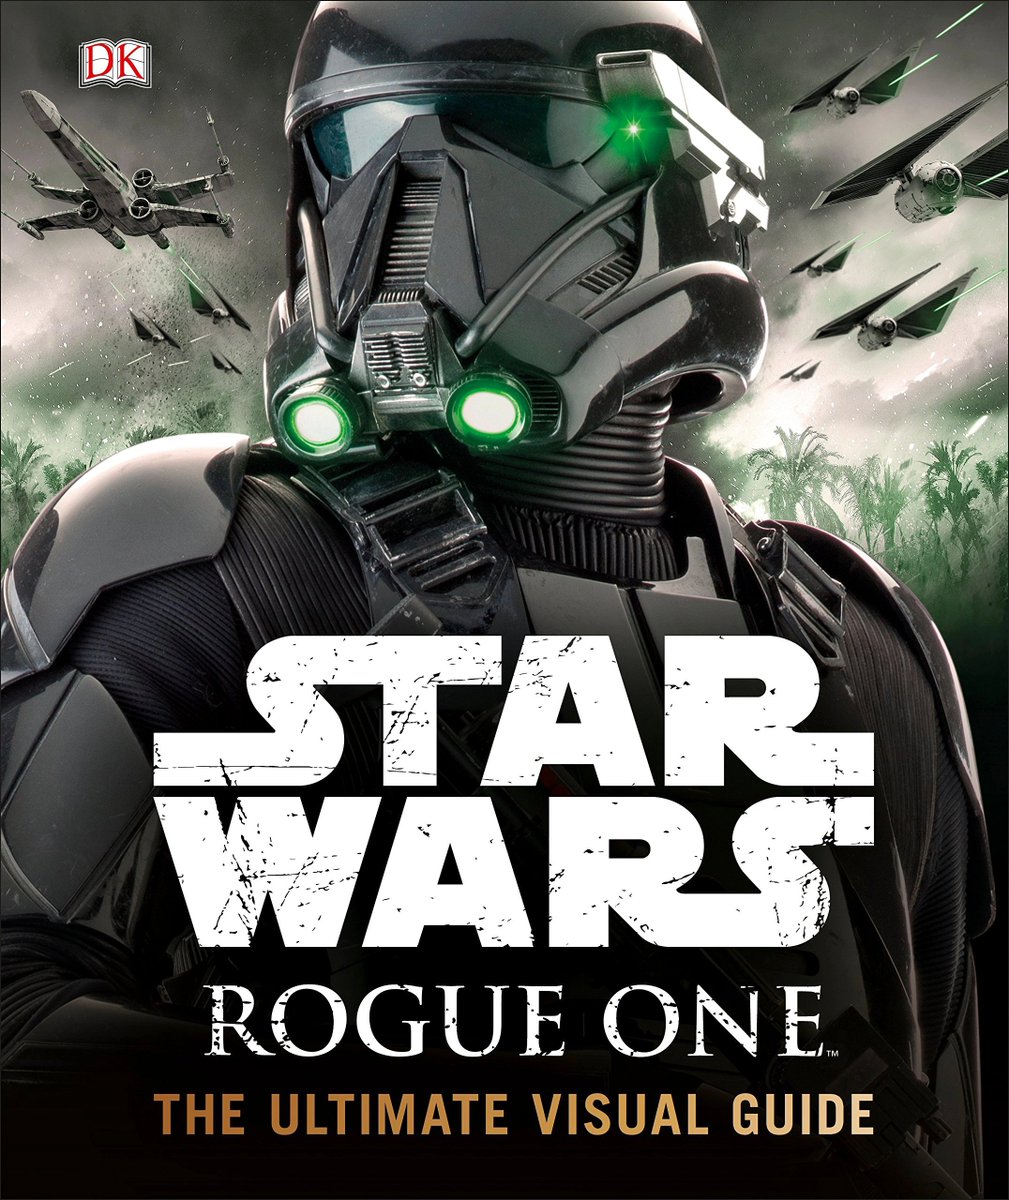 Welcome to another deep-drive thread boosted by quarantine boredom. This time we are going to look into my favorite not-IU Star Wars reference book from the Disney era:  @pablohidalgo and Kemp Remillard's "Rogue One: The Ultimate Visual Guide"